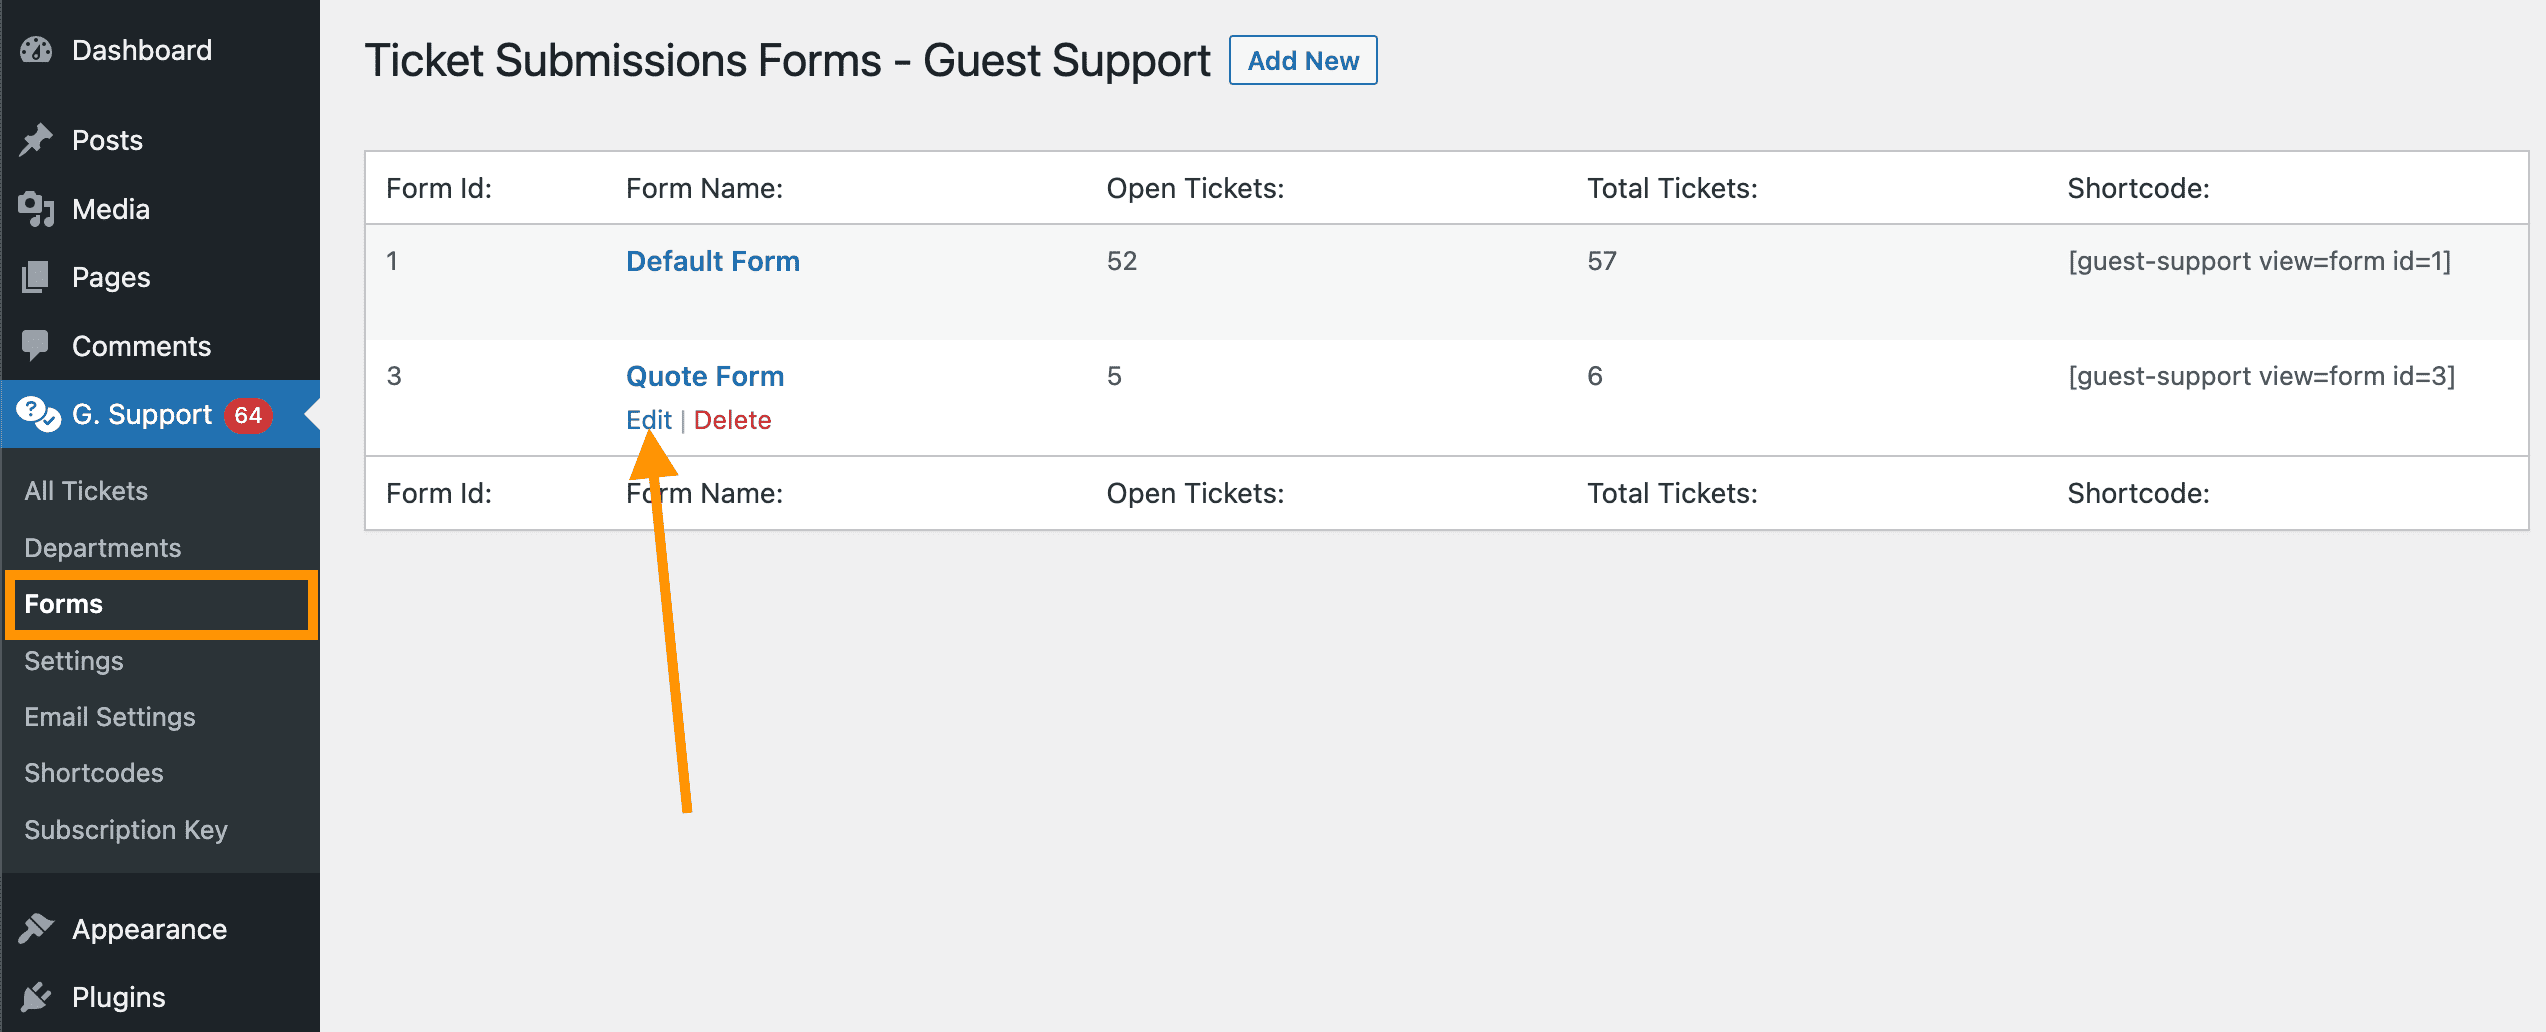 Guest support - edit forms